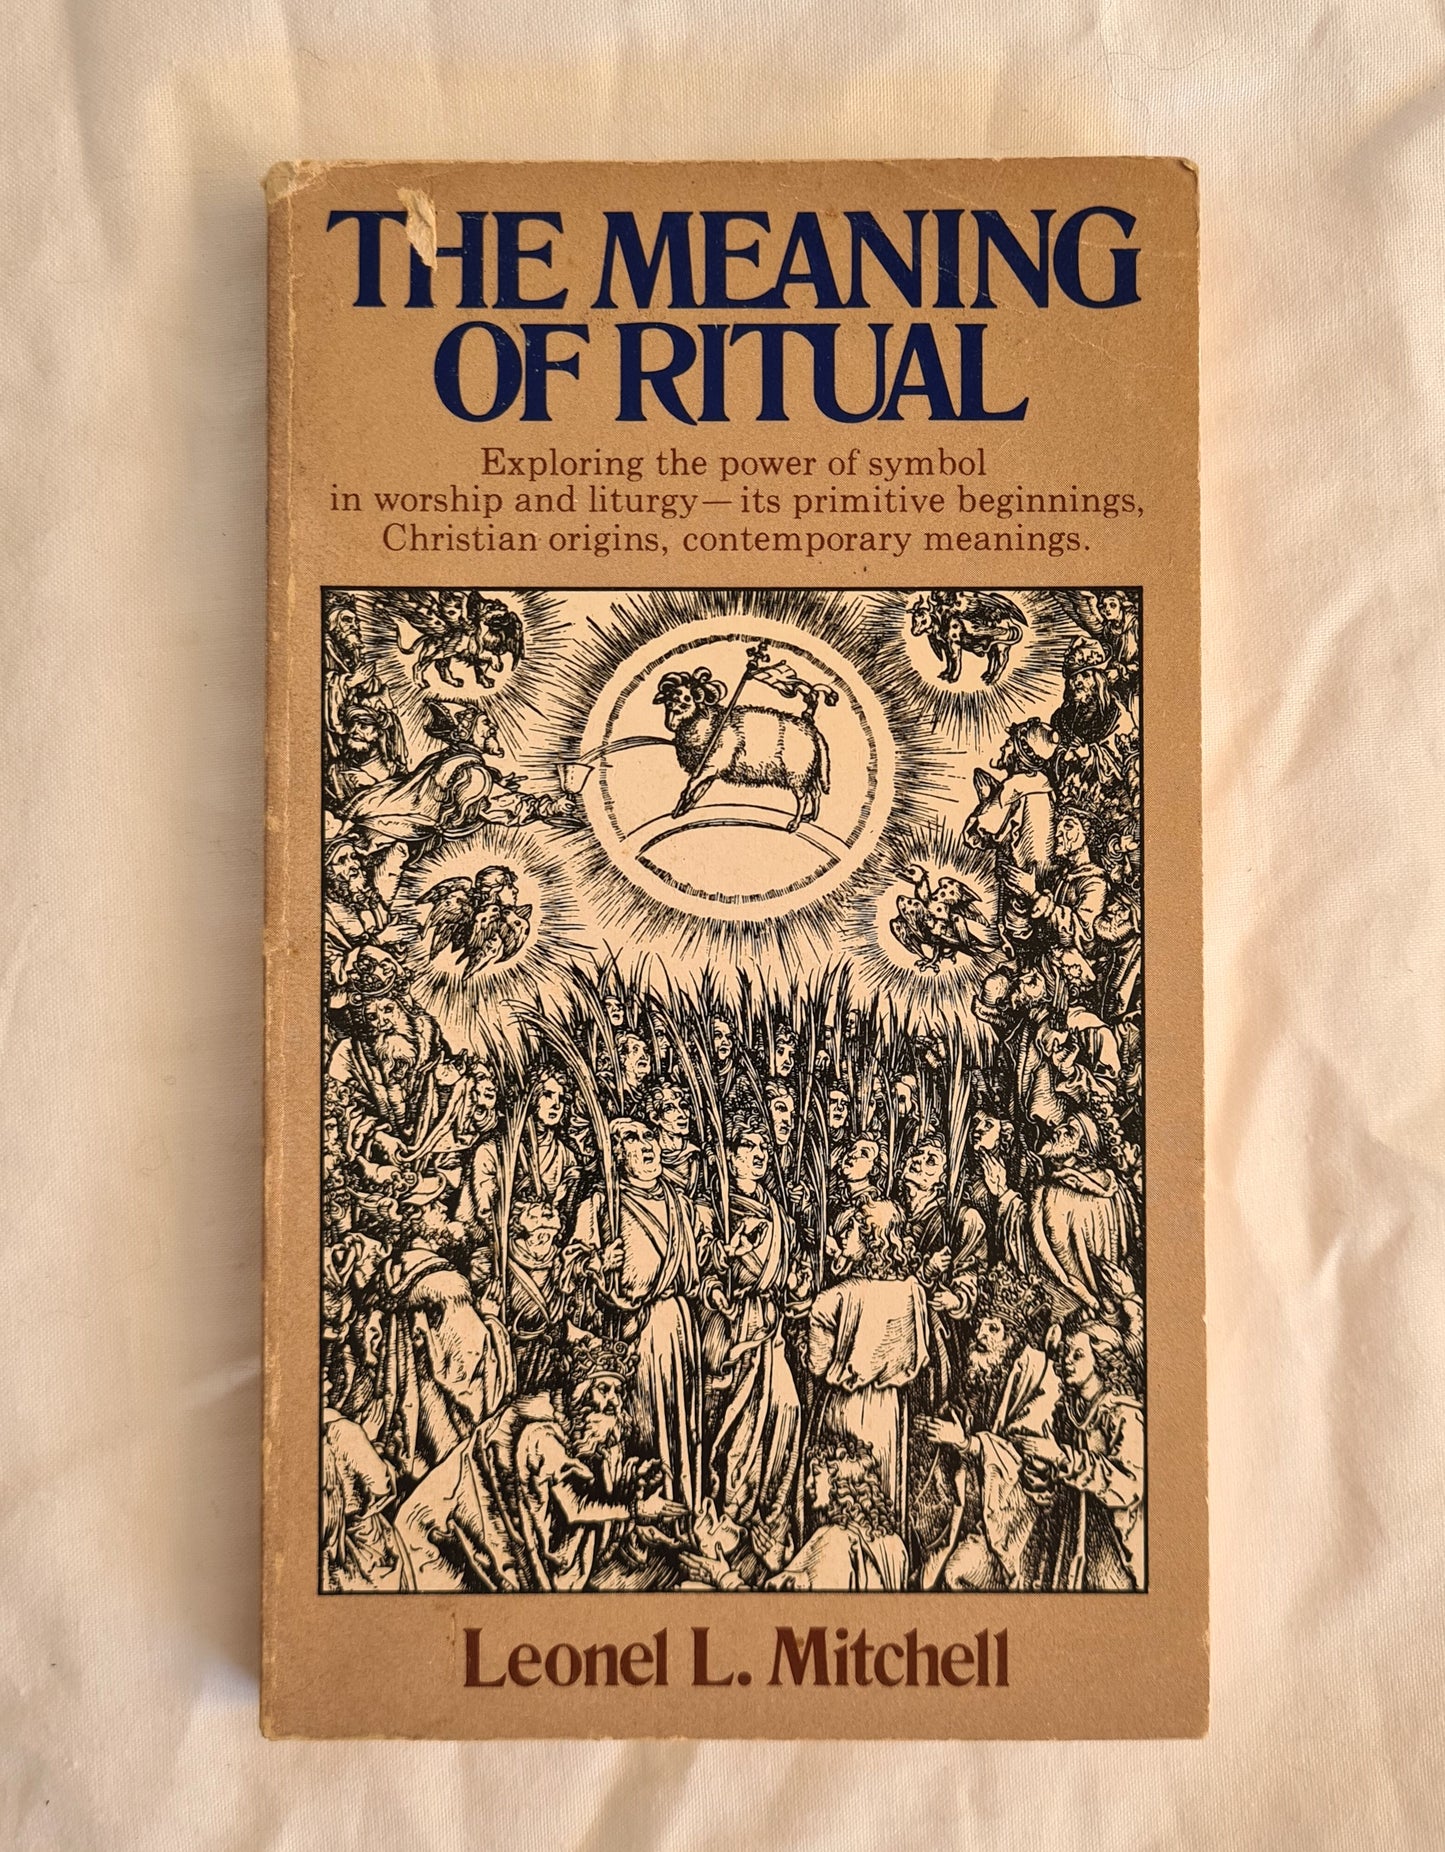 The Meaning of Ritual  Exploring the power of symbol in worship and liturgy – its primitive beginnings, Christian origins, contemporary meanings  by Leonel L. Mitchell